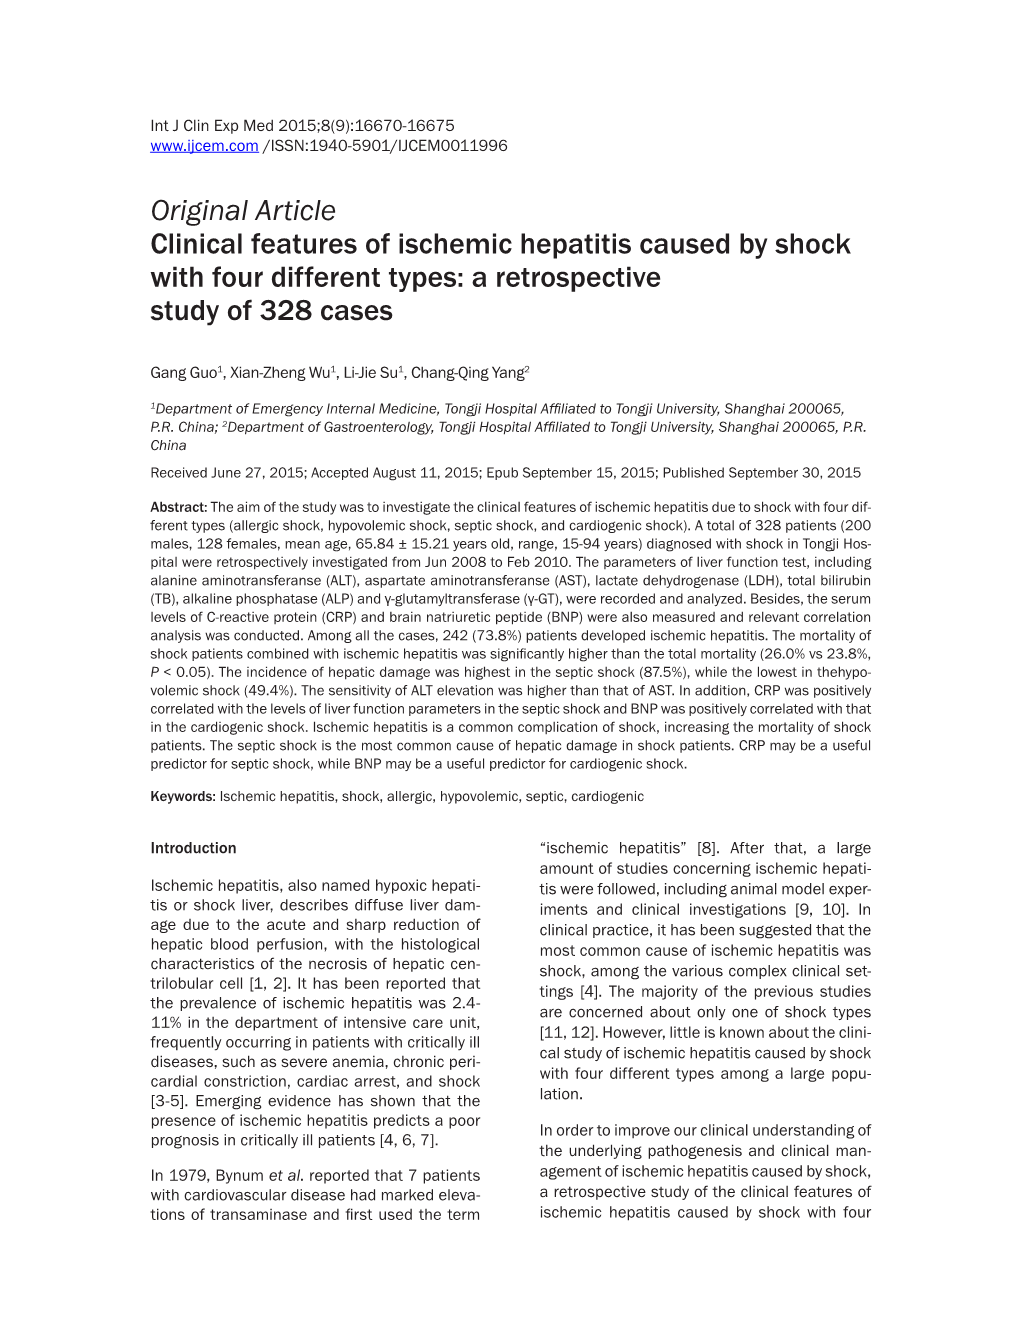 Original Article Clinical Features of Ischemic Hepatitis Caused by Shock with Four Different Types: a Retrospective Study of 328 Cases